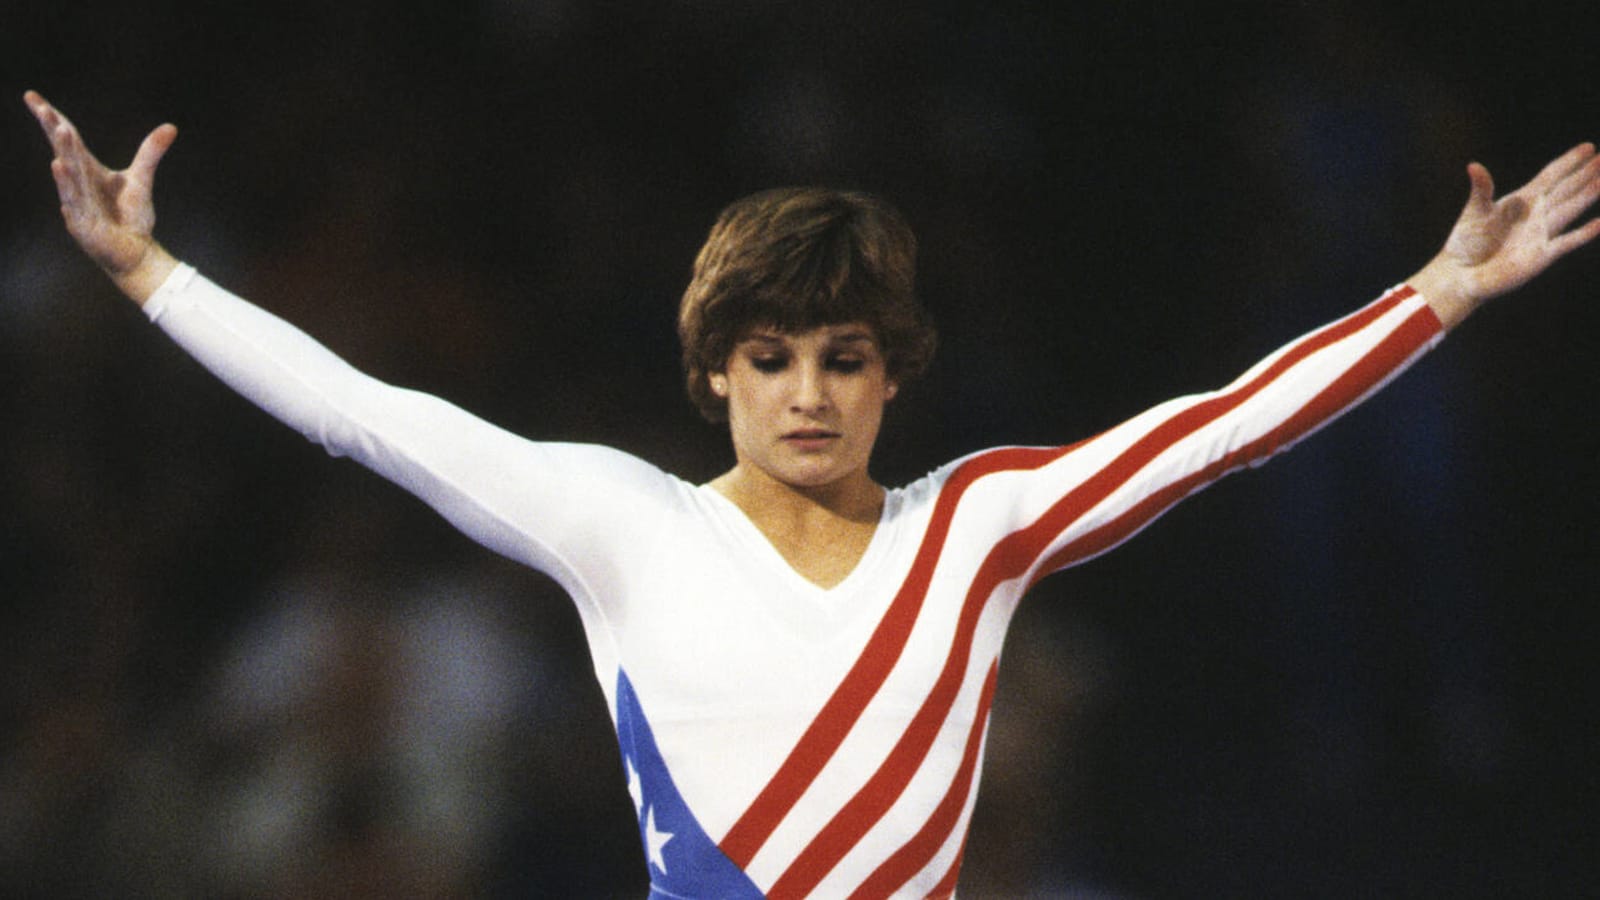 Gymnastics legend Mary Lou Retton 'fighting for her life' in ICU